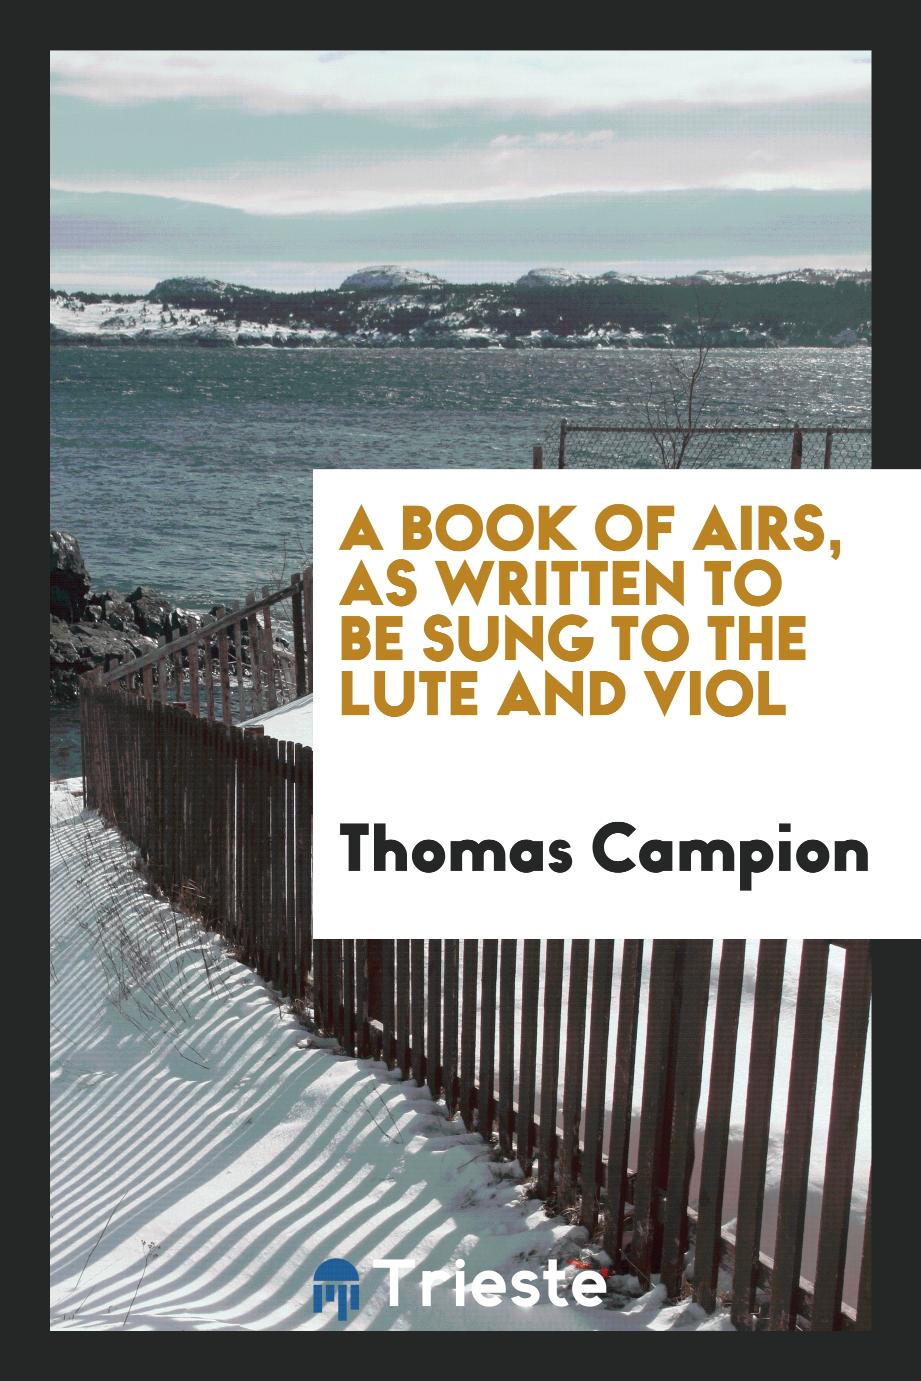 Thomas Campion - A book of airs, as written to be sung to the lute and viol